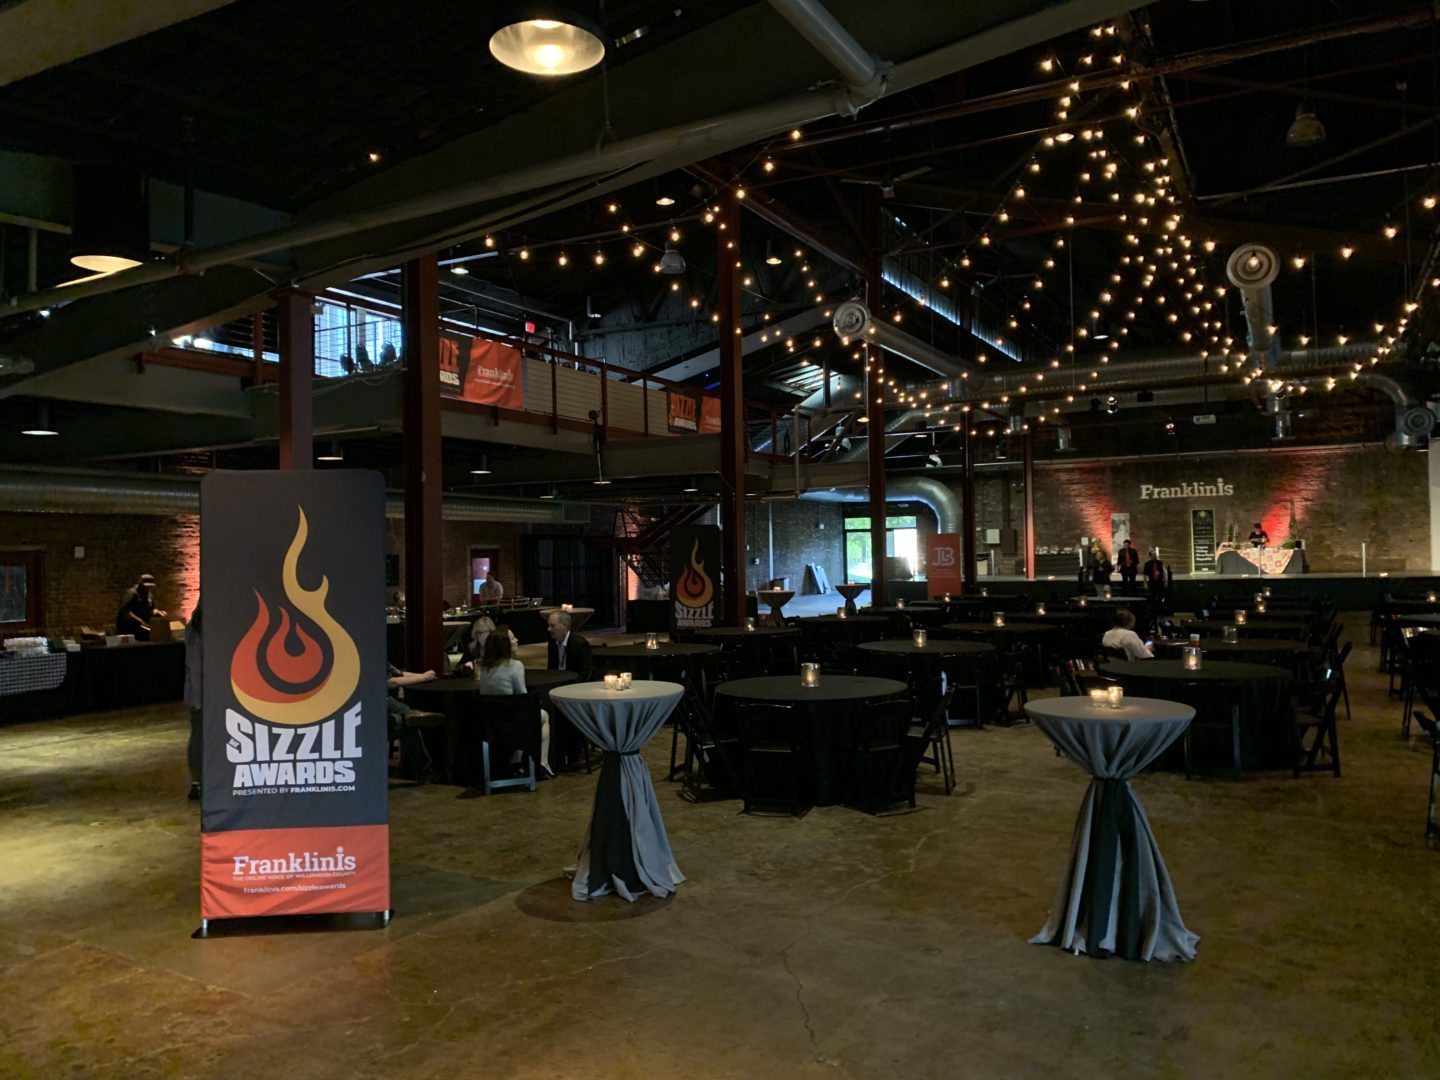 The Sizzle Awards, Williamson County, TN Best Business Awards.